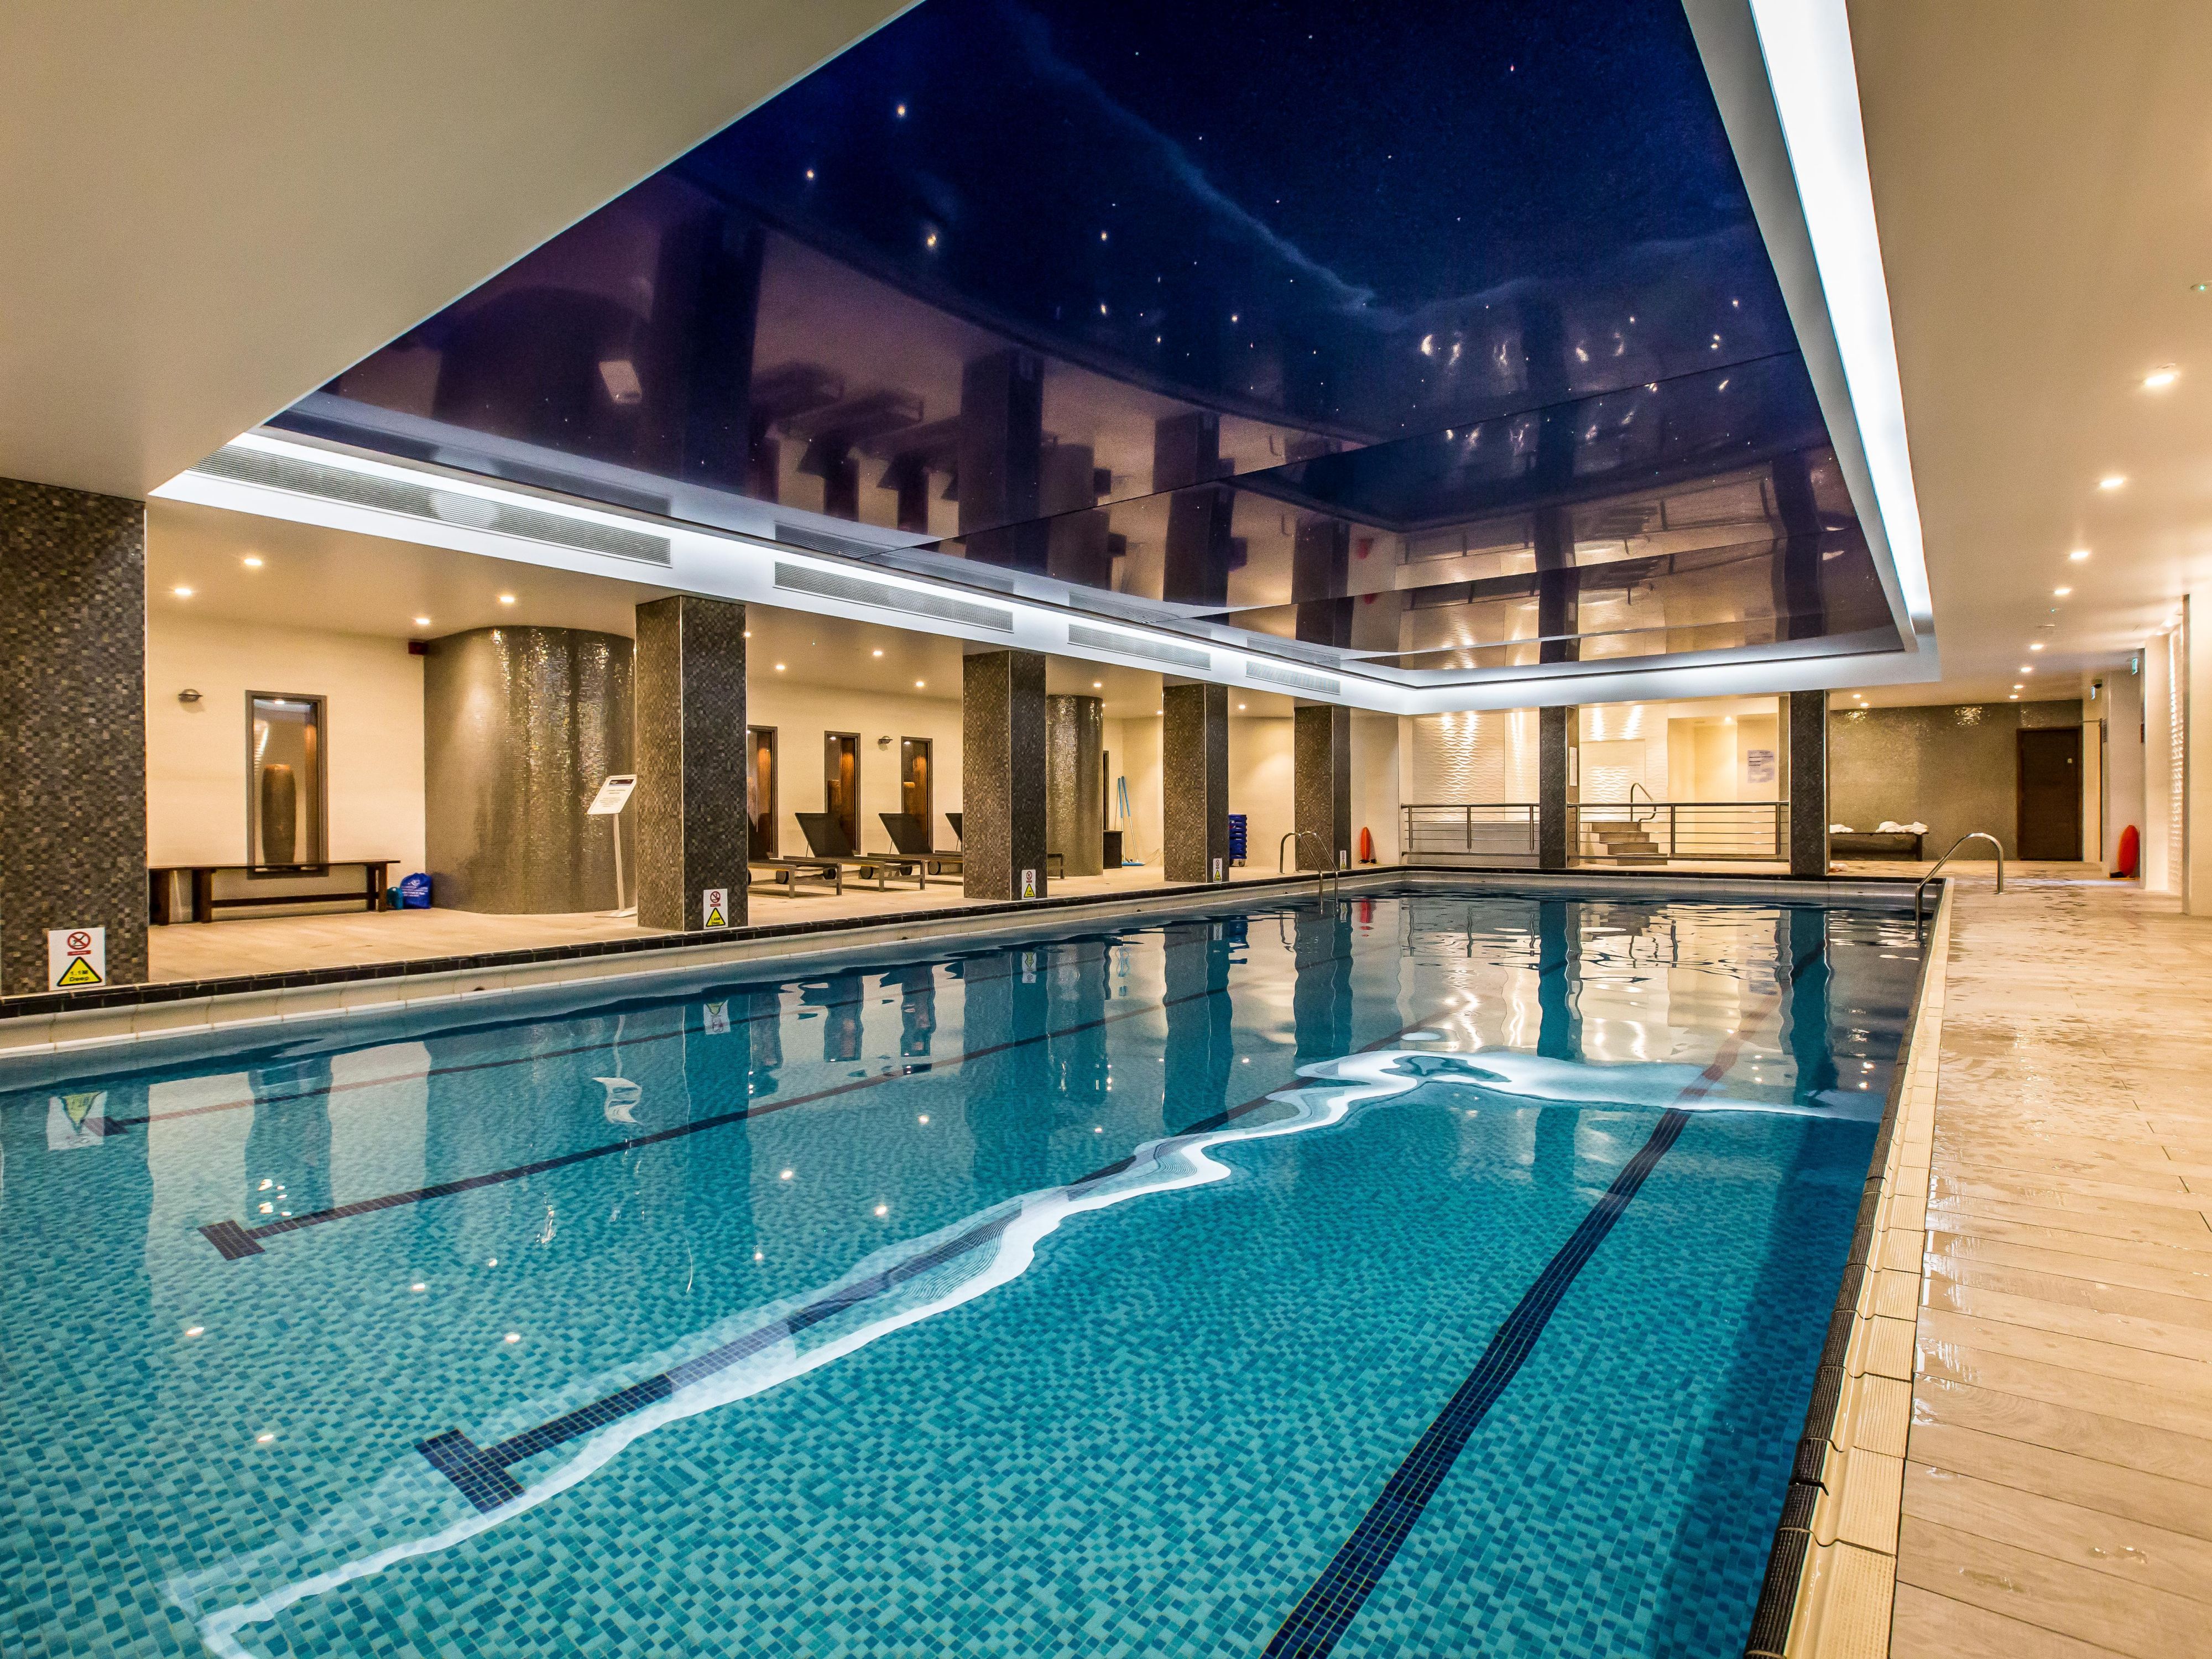 18 metre Indoor heated swimming pool, free to all hotel residents
